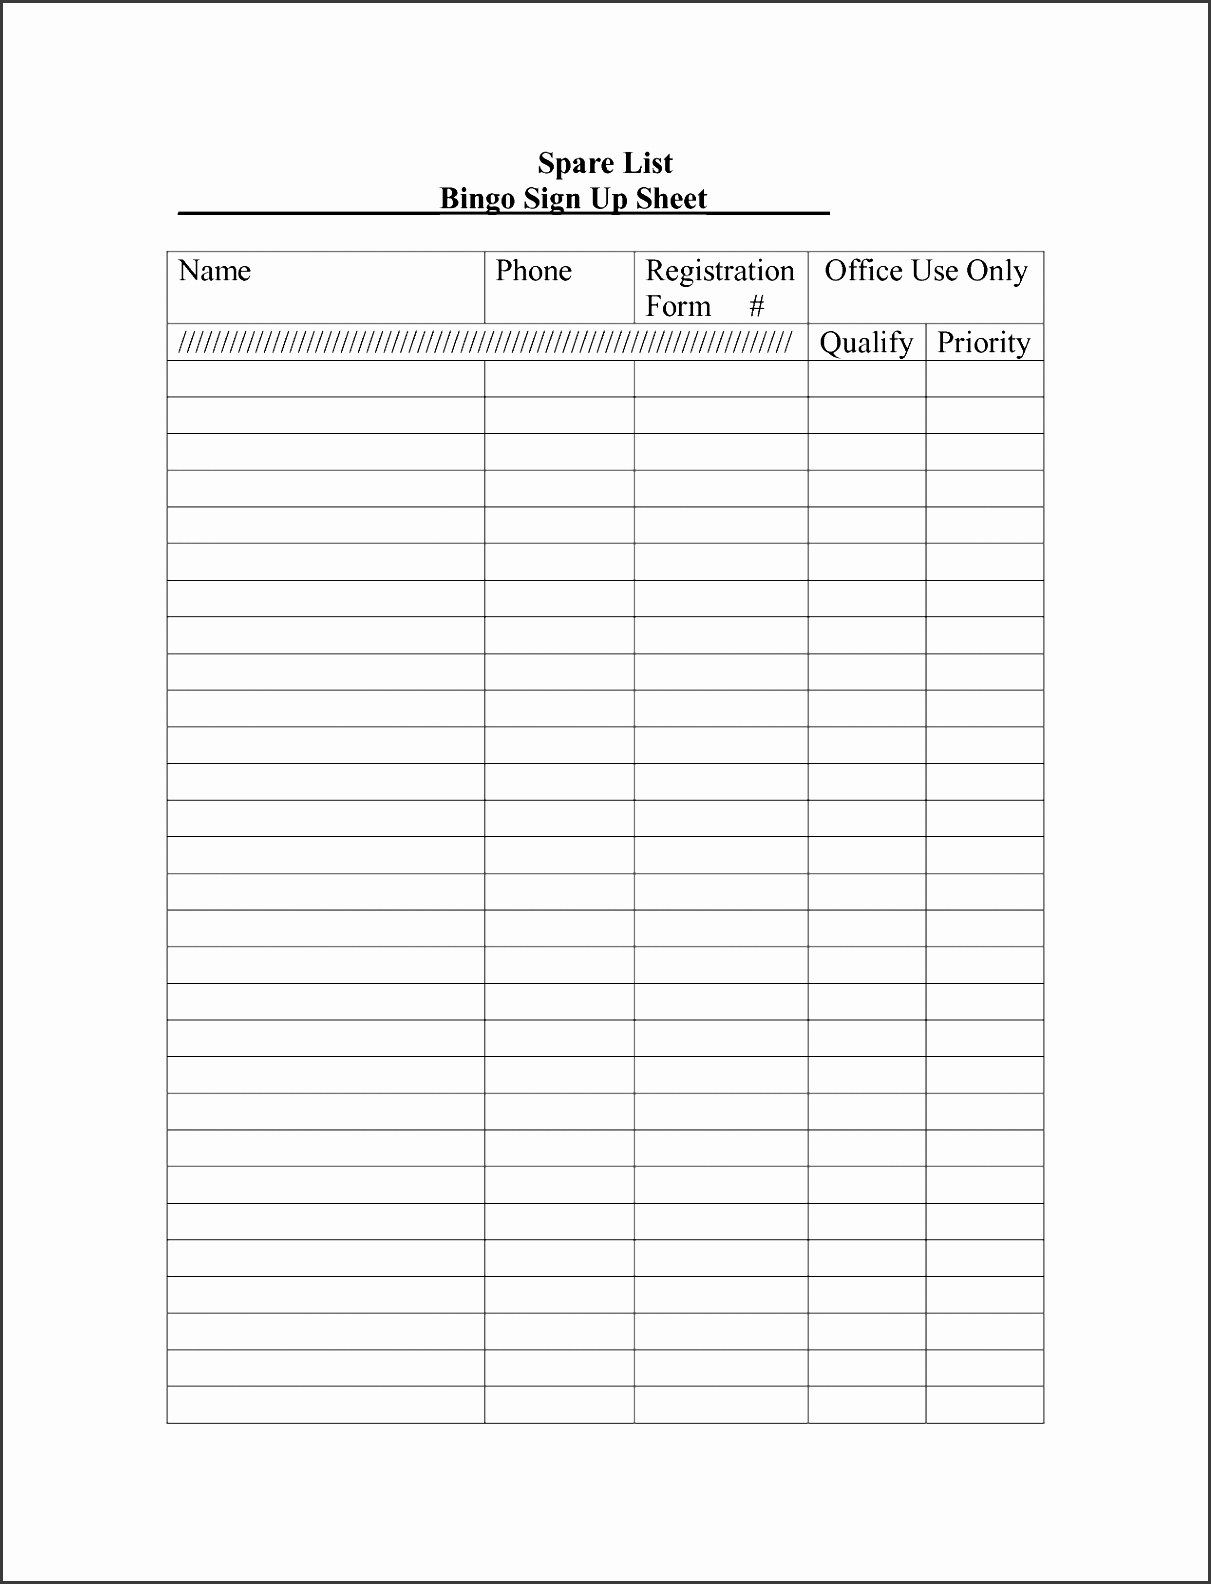 Please Sign In Sheet Best Of 6 How to Use Sign Up Sheet Template Sampletemplatess